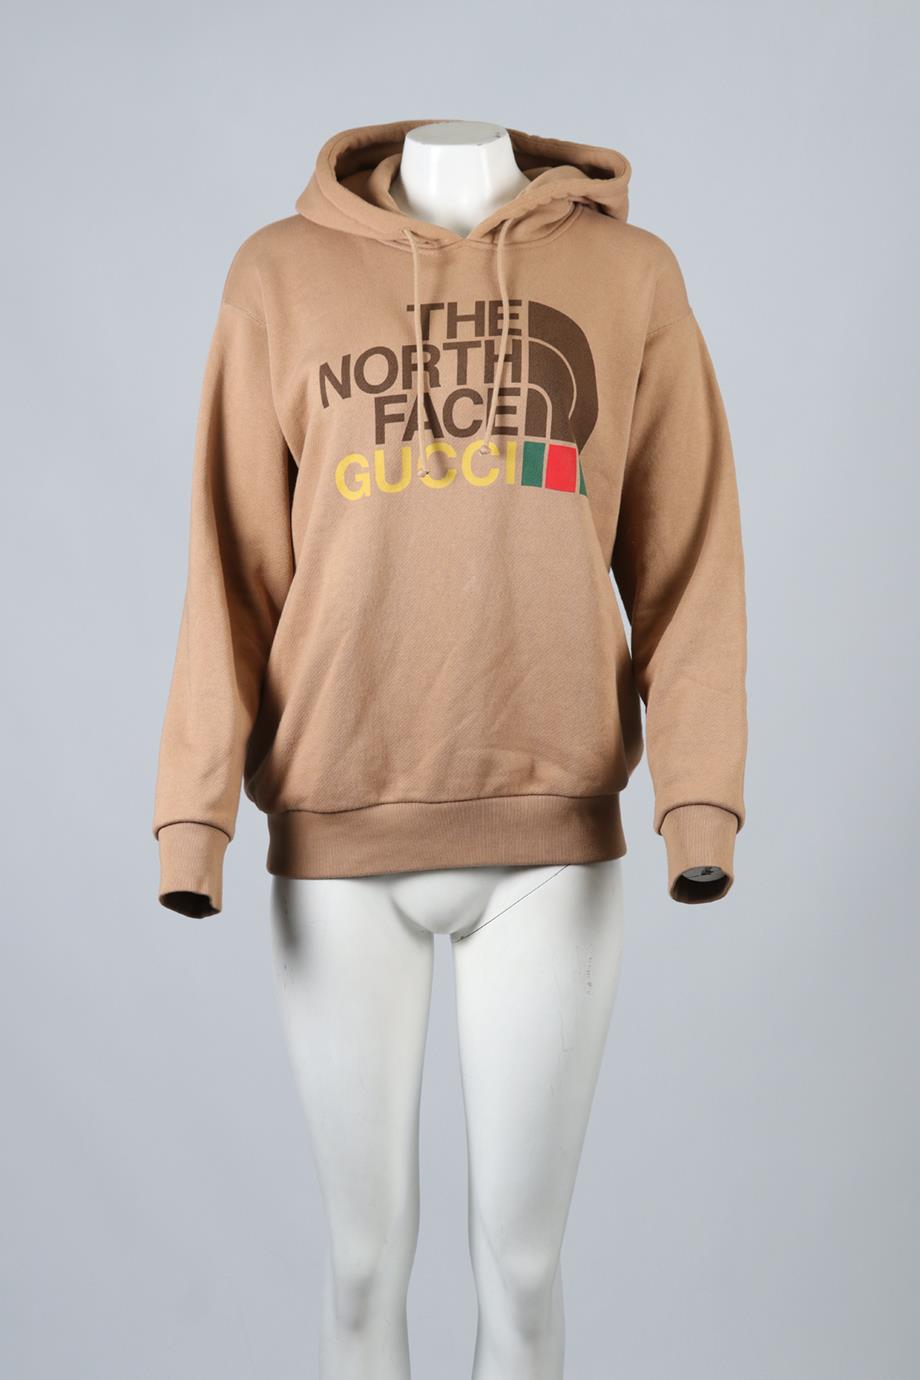 GUCCI + THE NORTH FACE COTTON HOODIE XXSMALL